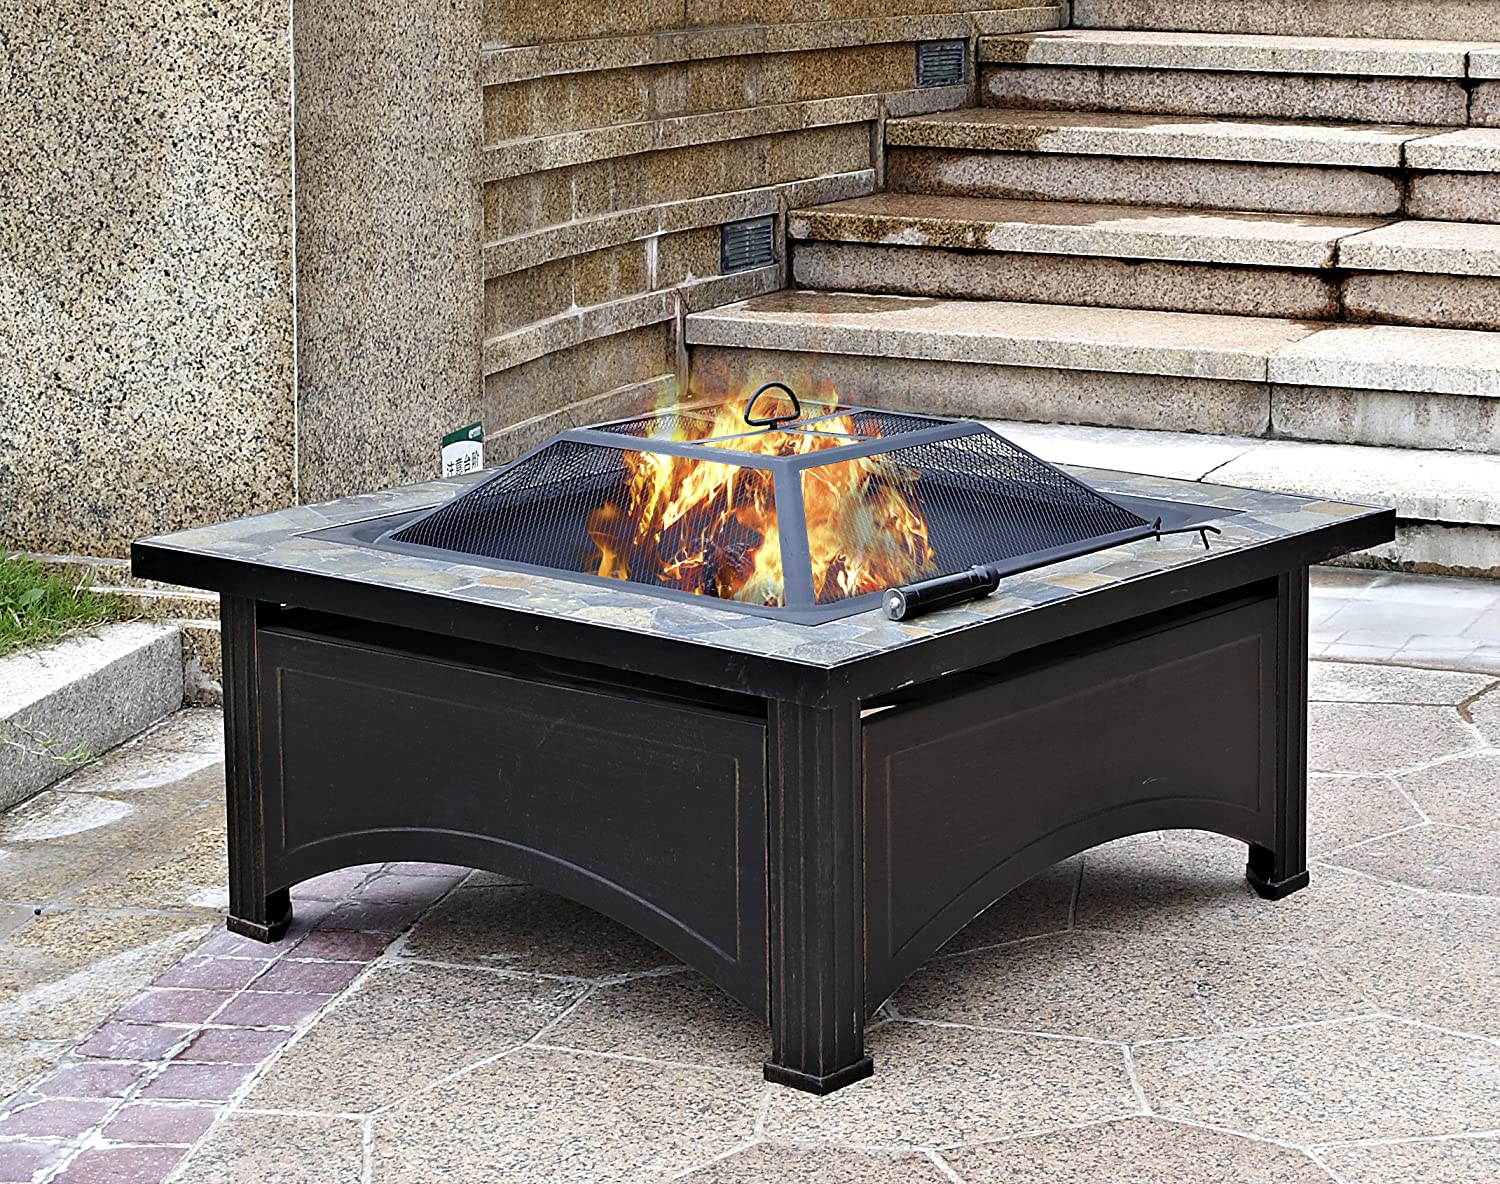 Hiland FT-51133D Square Burning Fire Pit w/Wood Grate and Domed Mesh Screen Lid, Poker Included, Slate Stone Tile Top